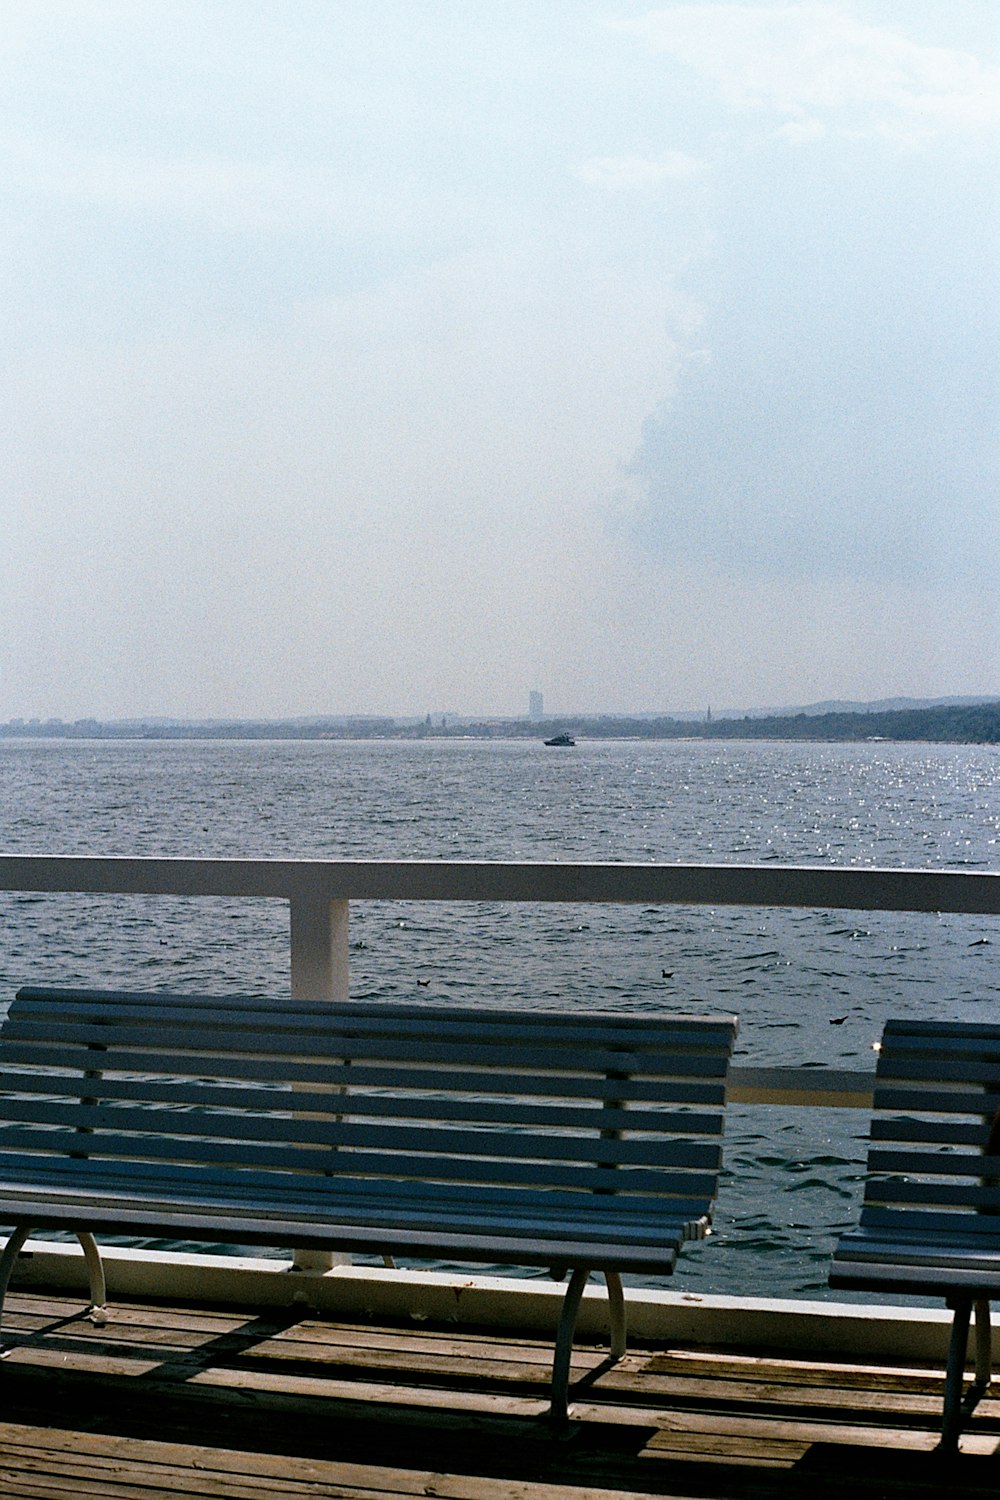 benches on a pier